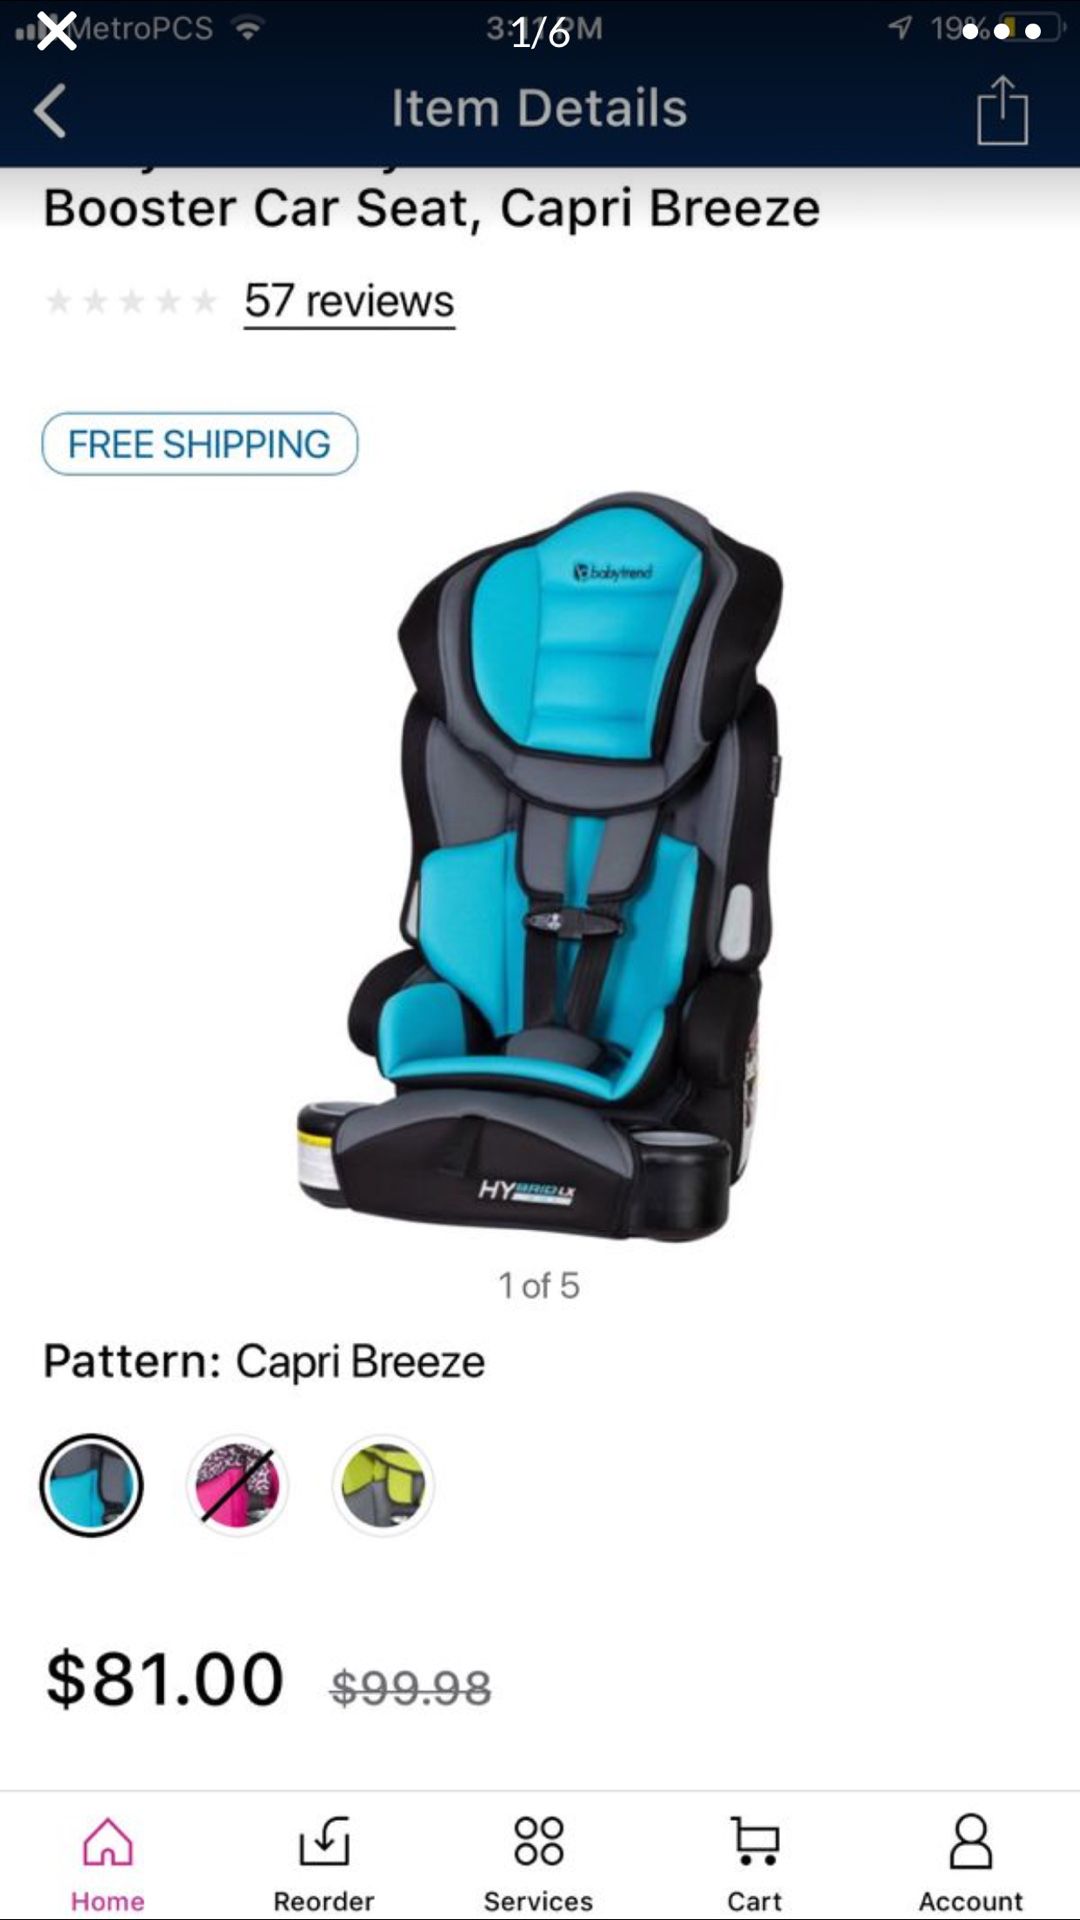 3 in 1 booster car seat still have 1 pink